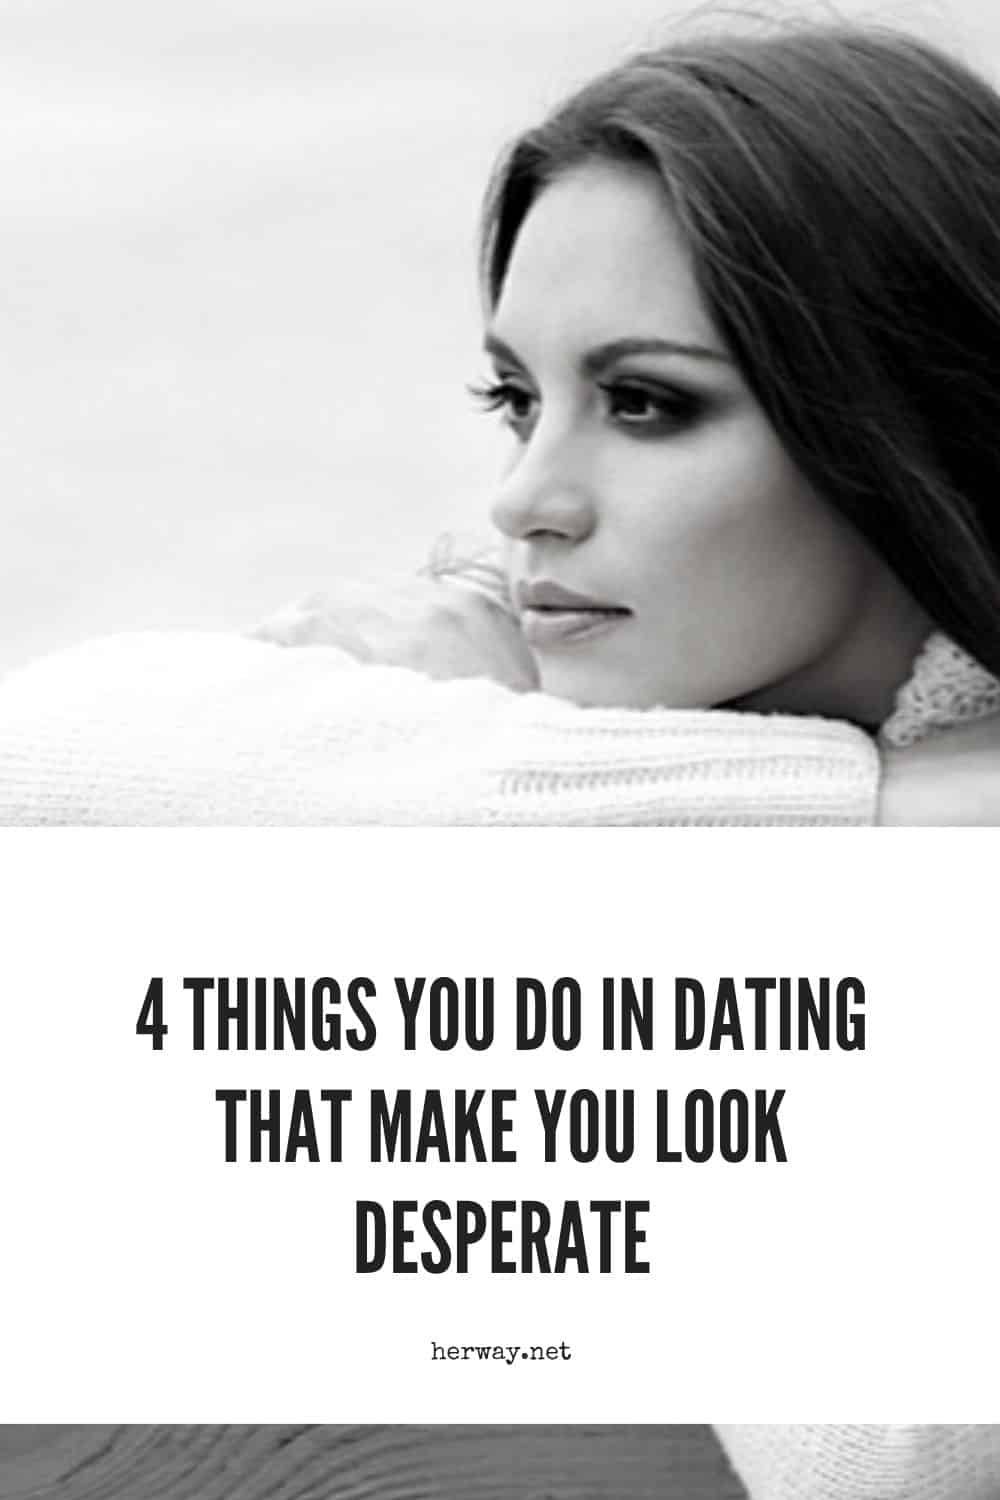 4 Things You Do In Dating That Make You Look Desperate